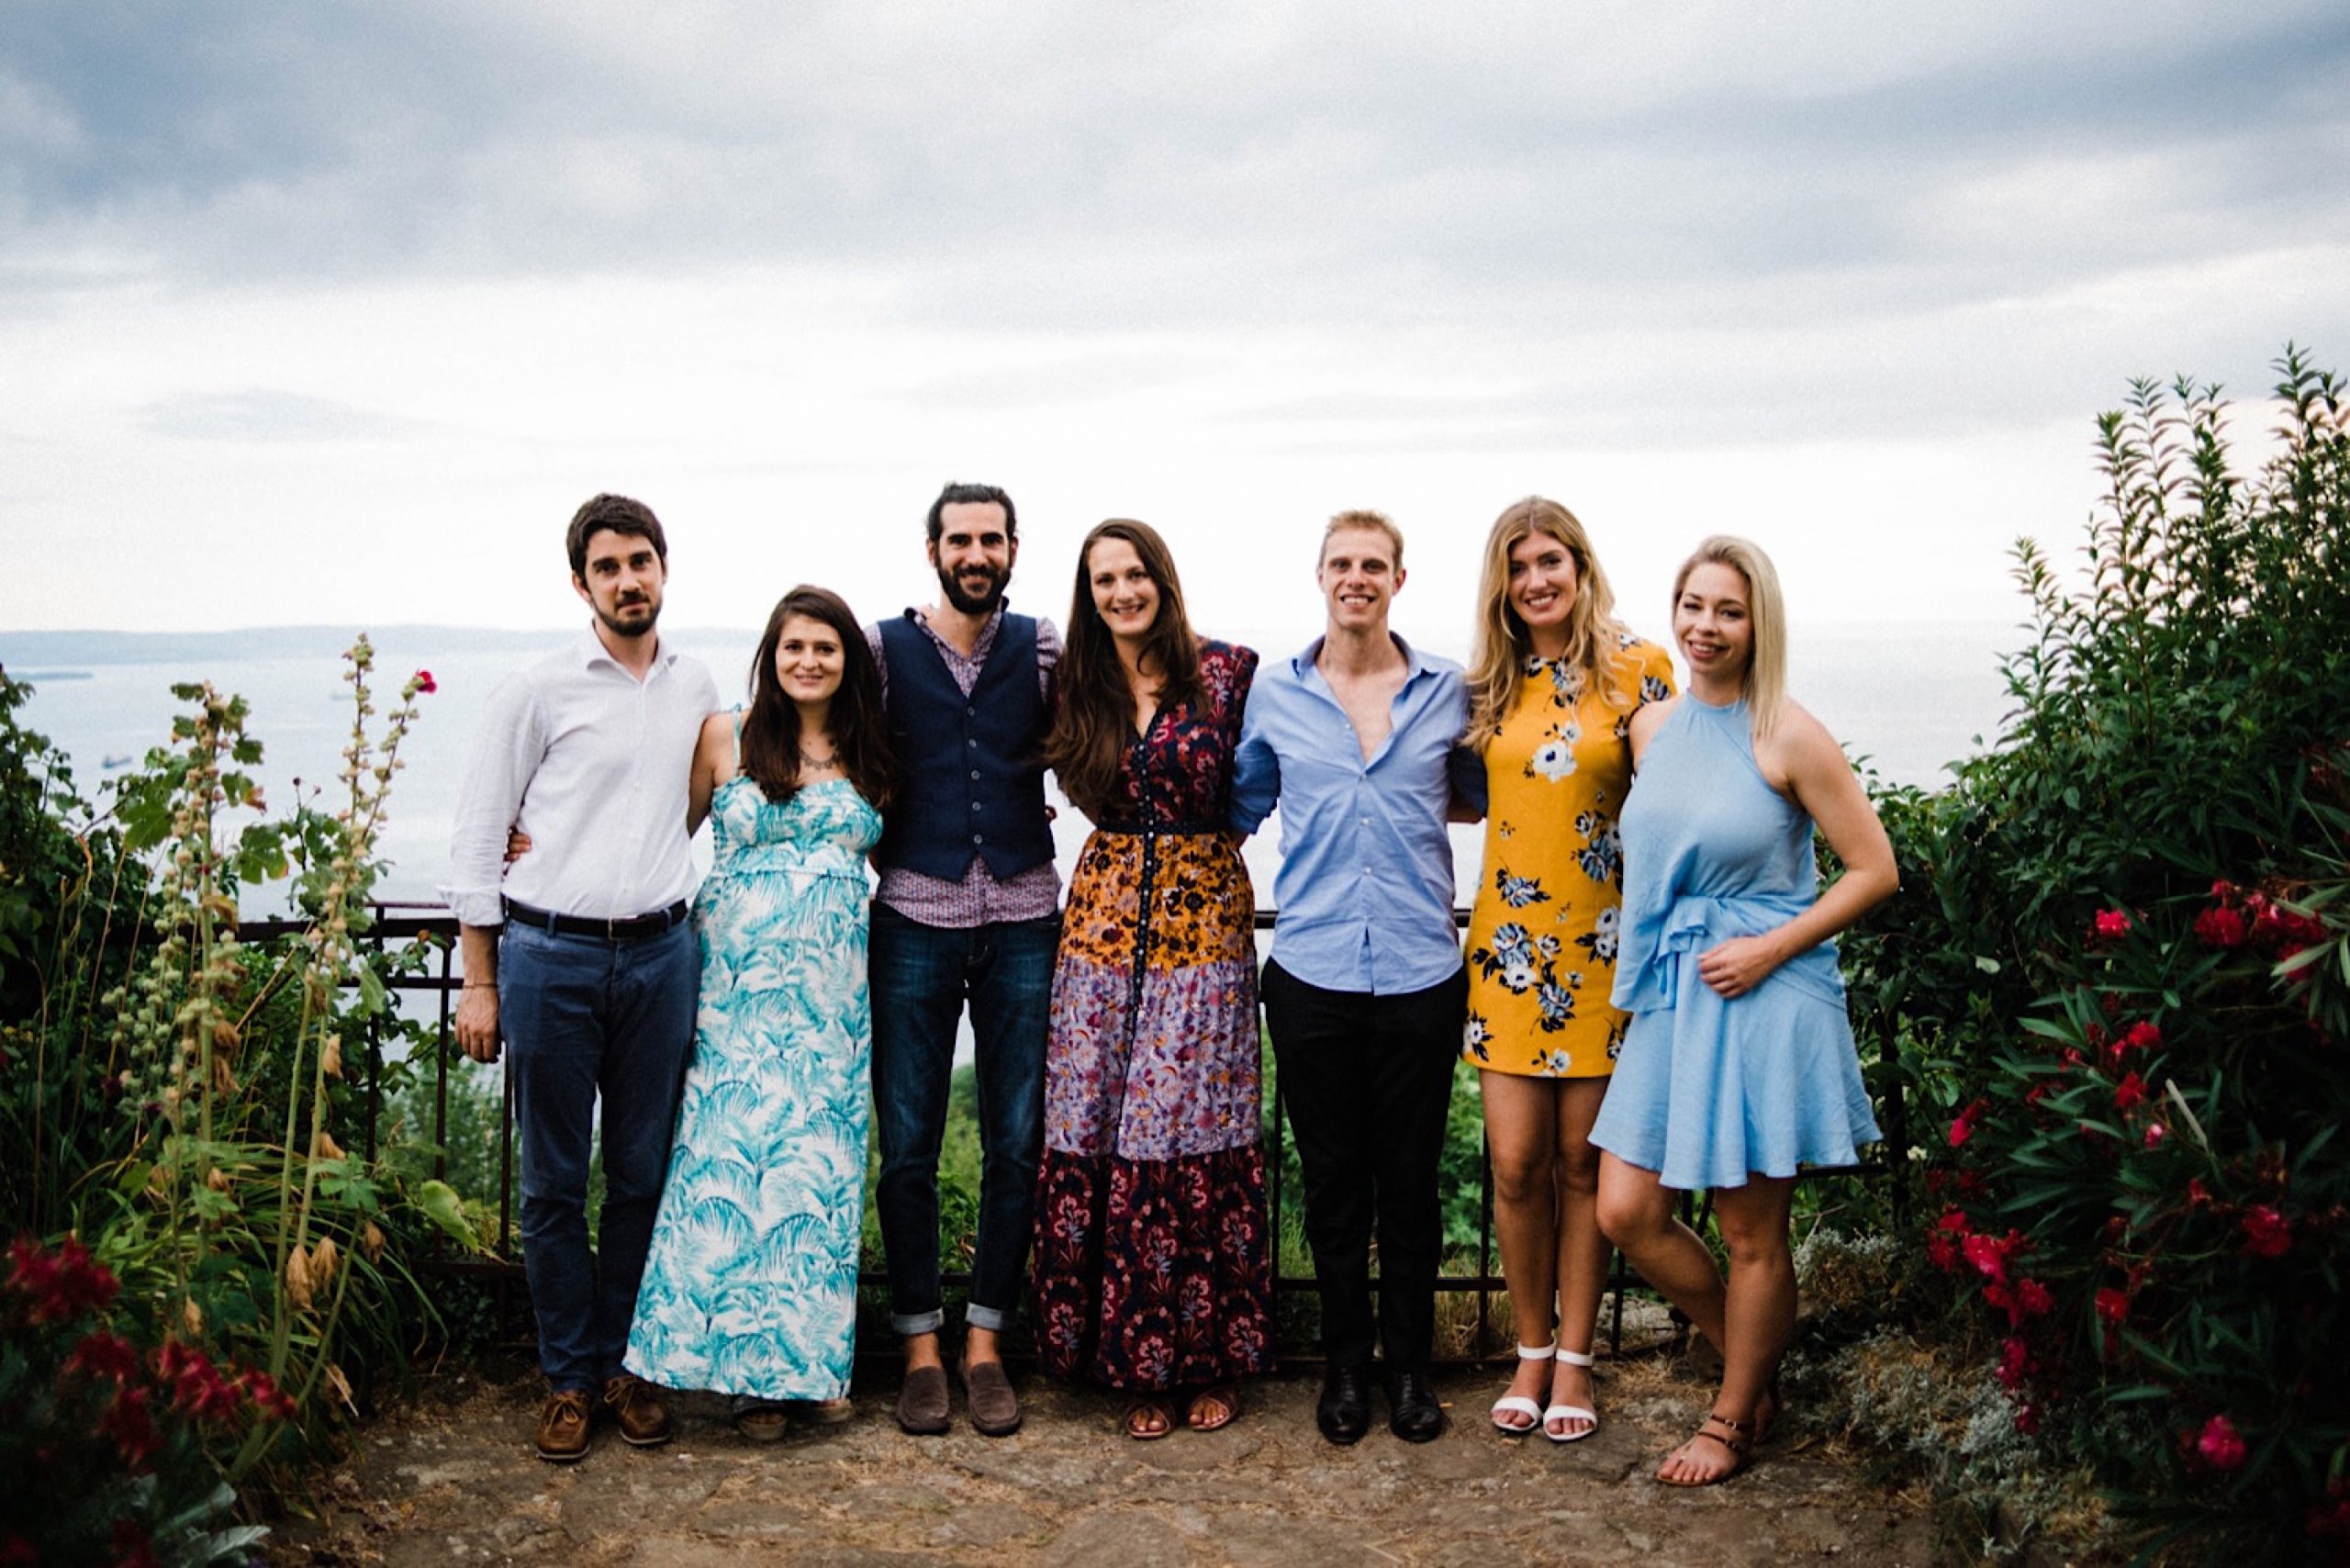 A group photo from an Intimate Destination Wedding in Trieste, Italy. The group wears colourful clothes, and stand in a garden looking out over the sea with stormy skies in the background.